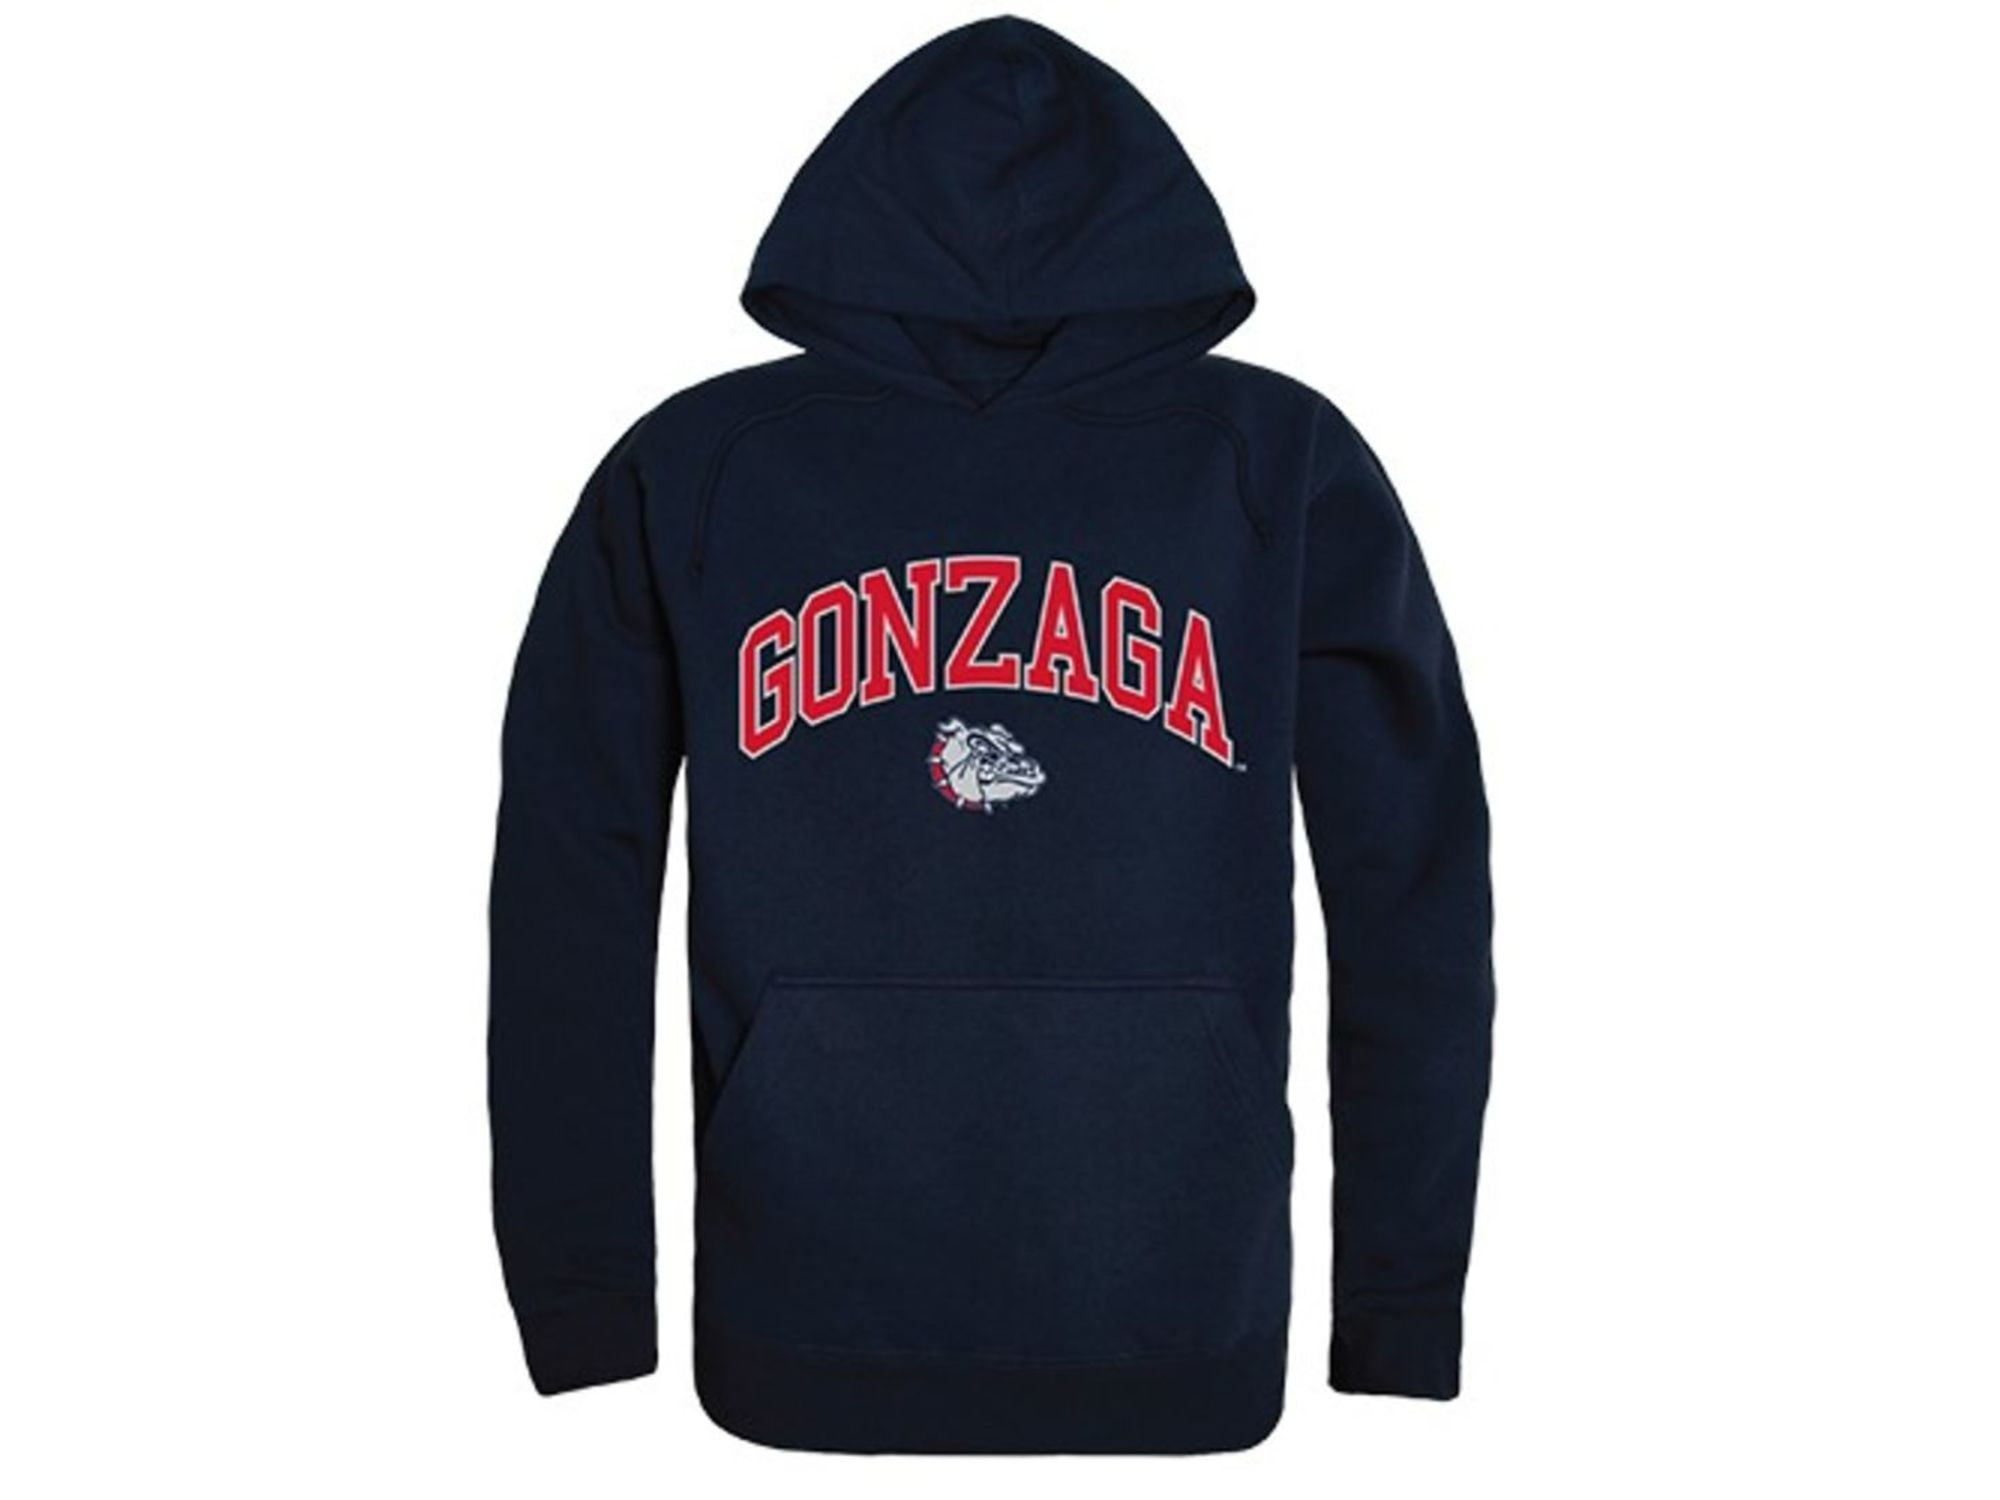 Gonzaga University Official Bulldogs Logo Unisex Adult Pull-Over Hoodie 